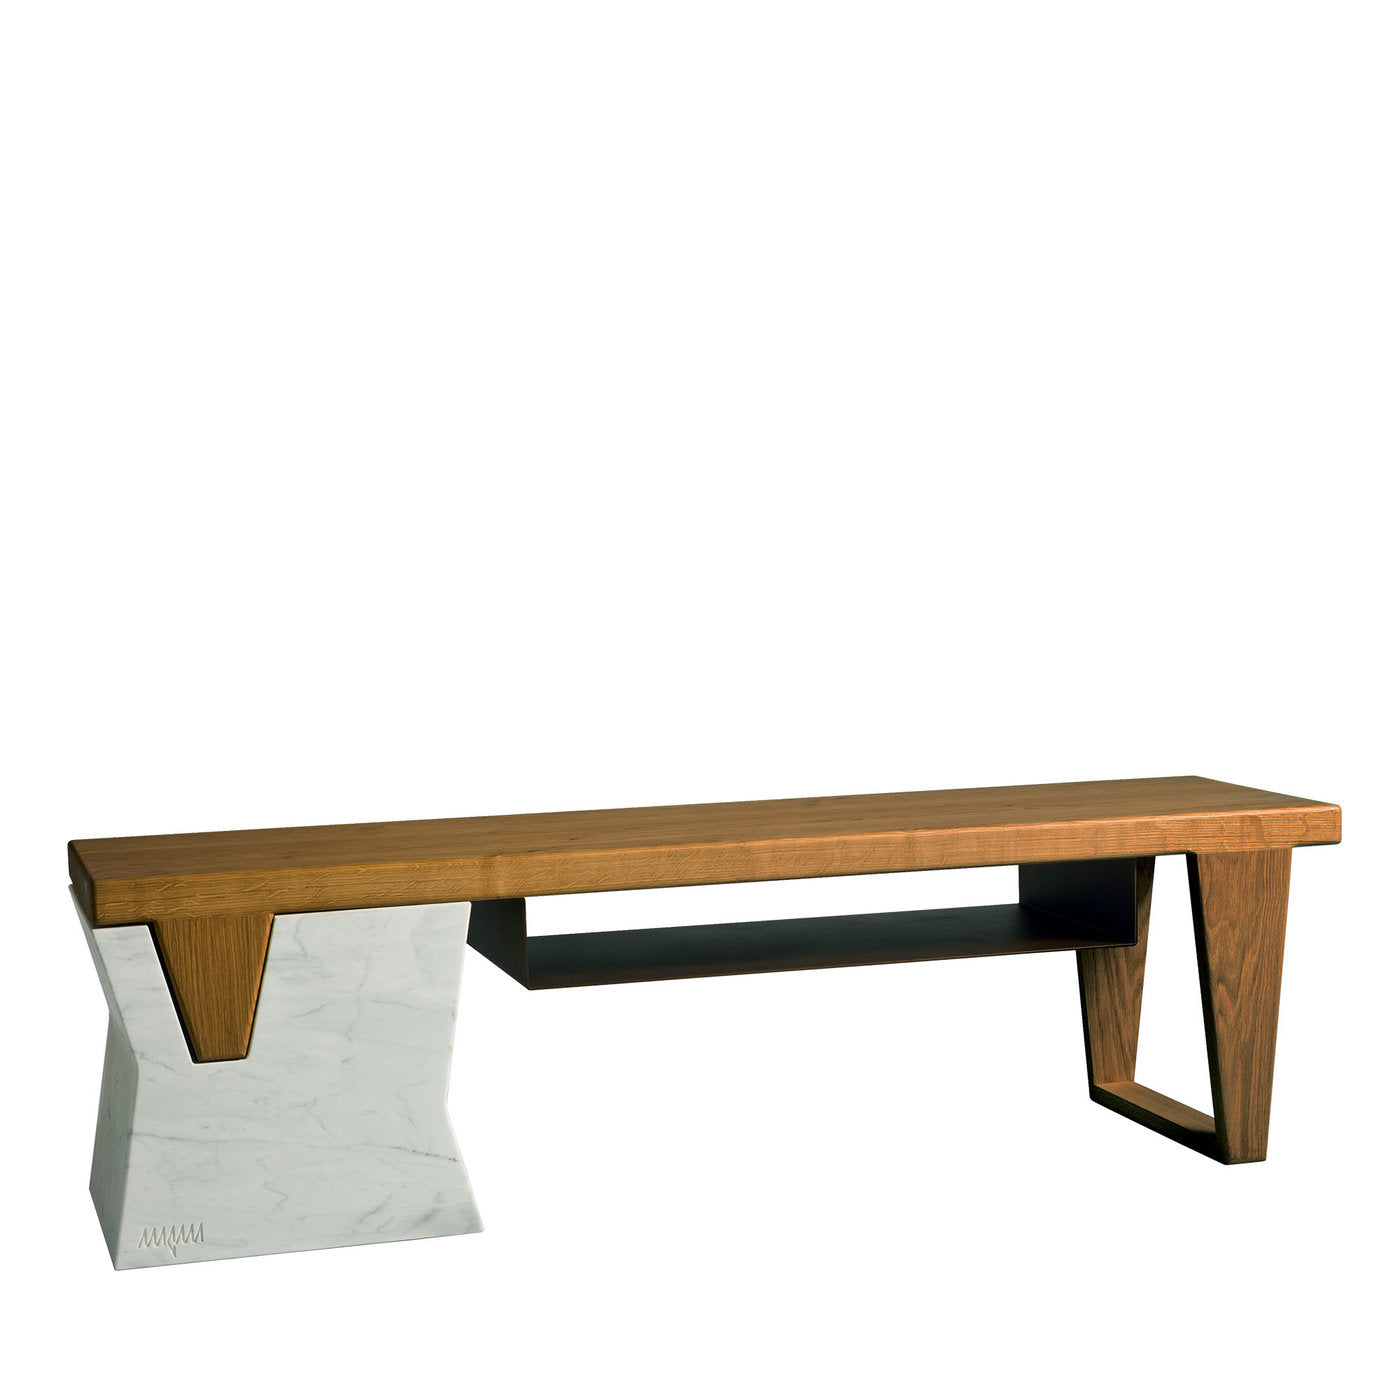 Plaza Bench with Shelf by Paolo Salvadè - Main view